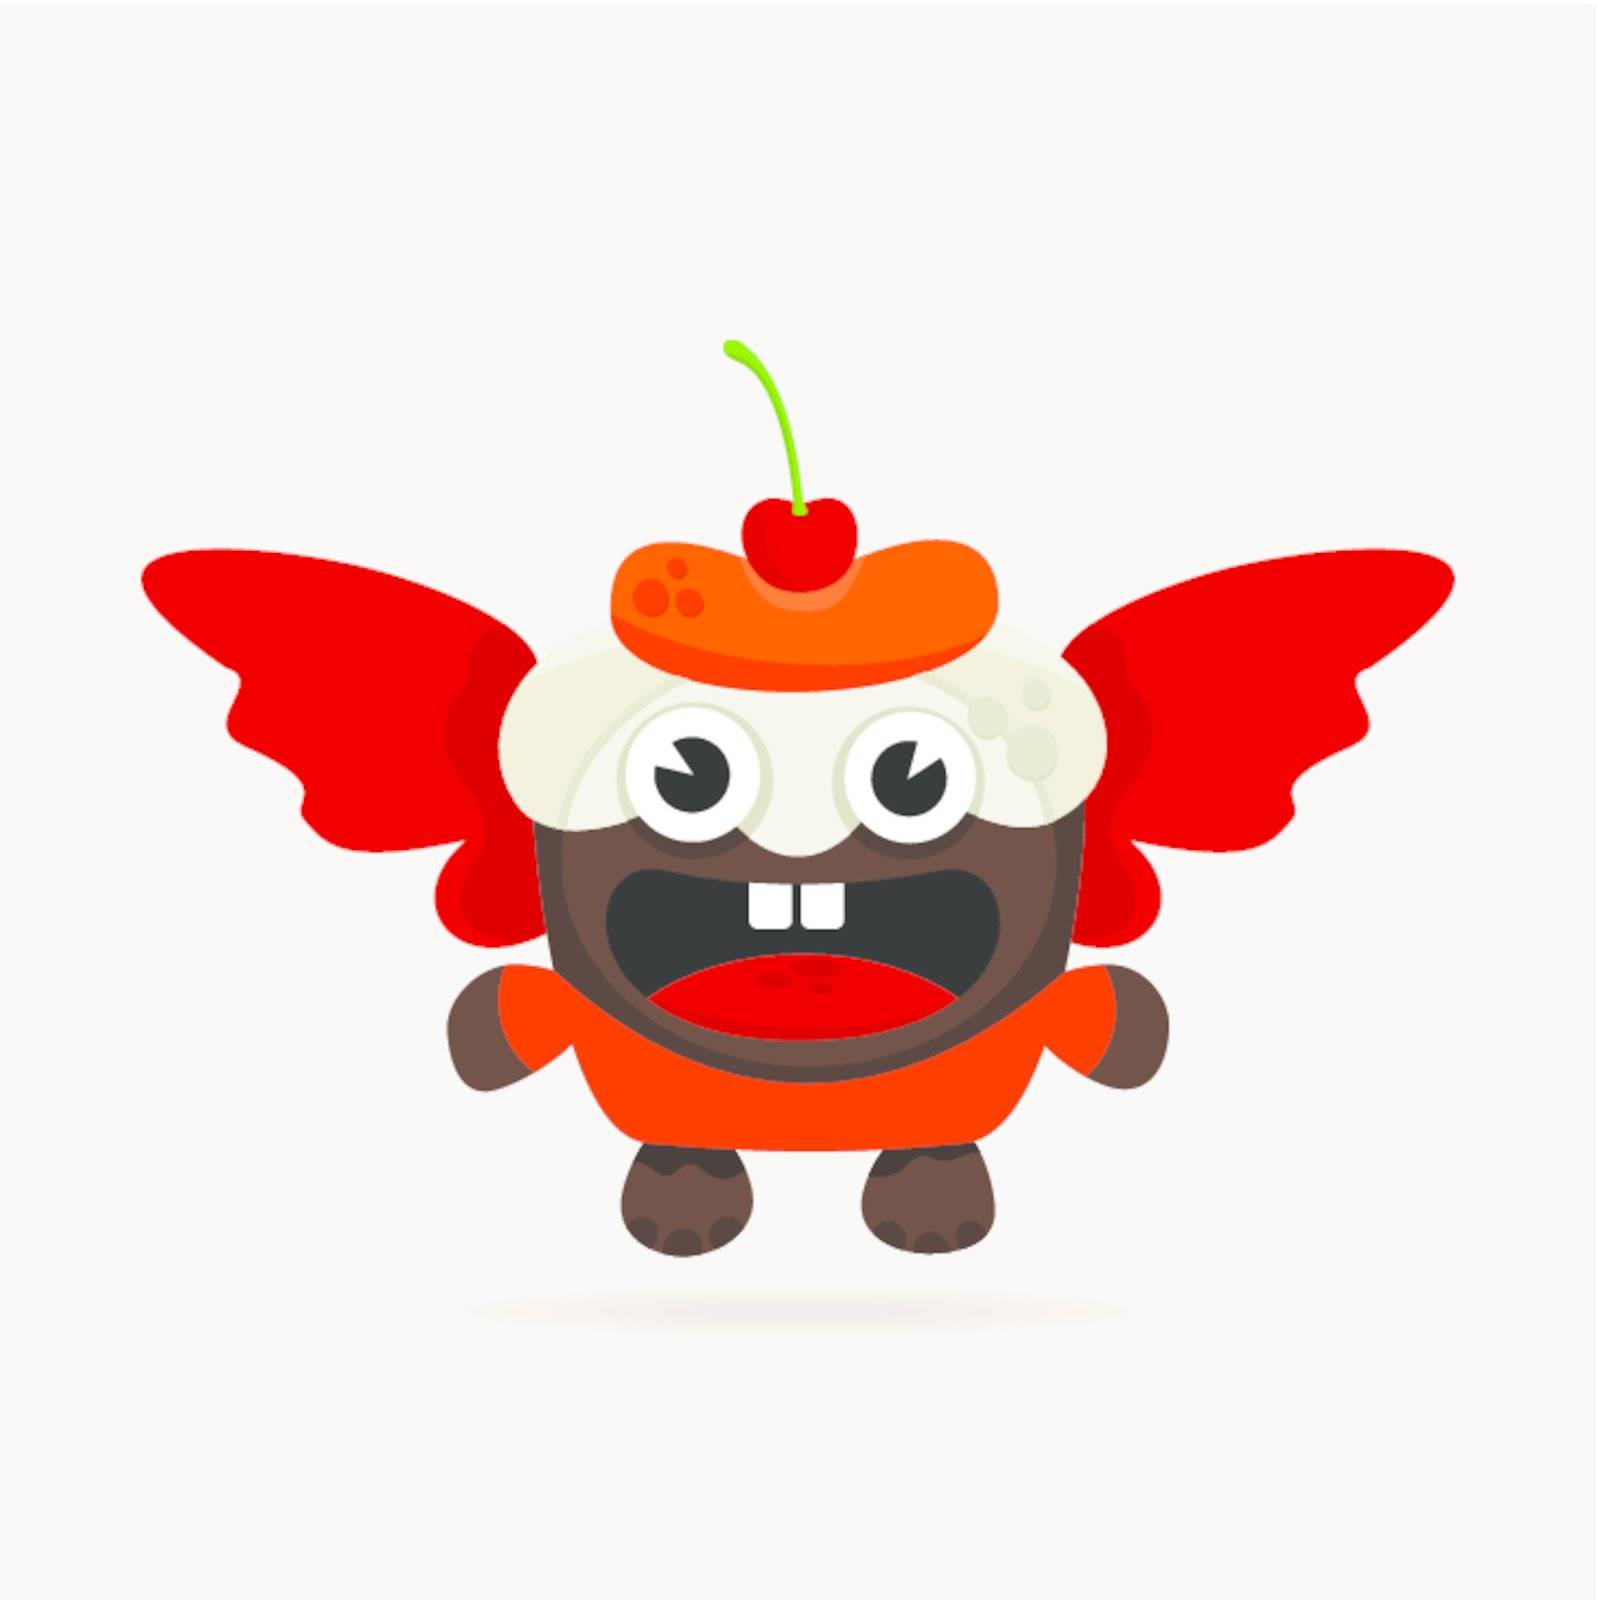 Fruitcake with wings. A vector illustration